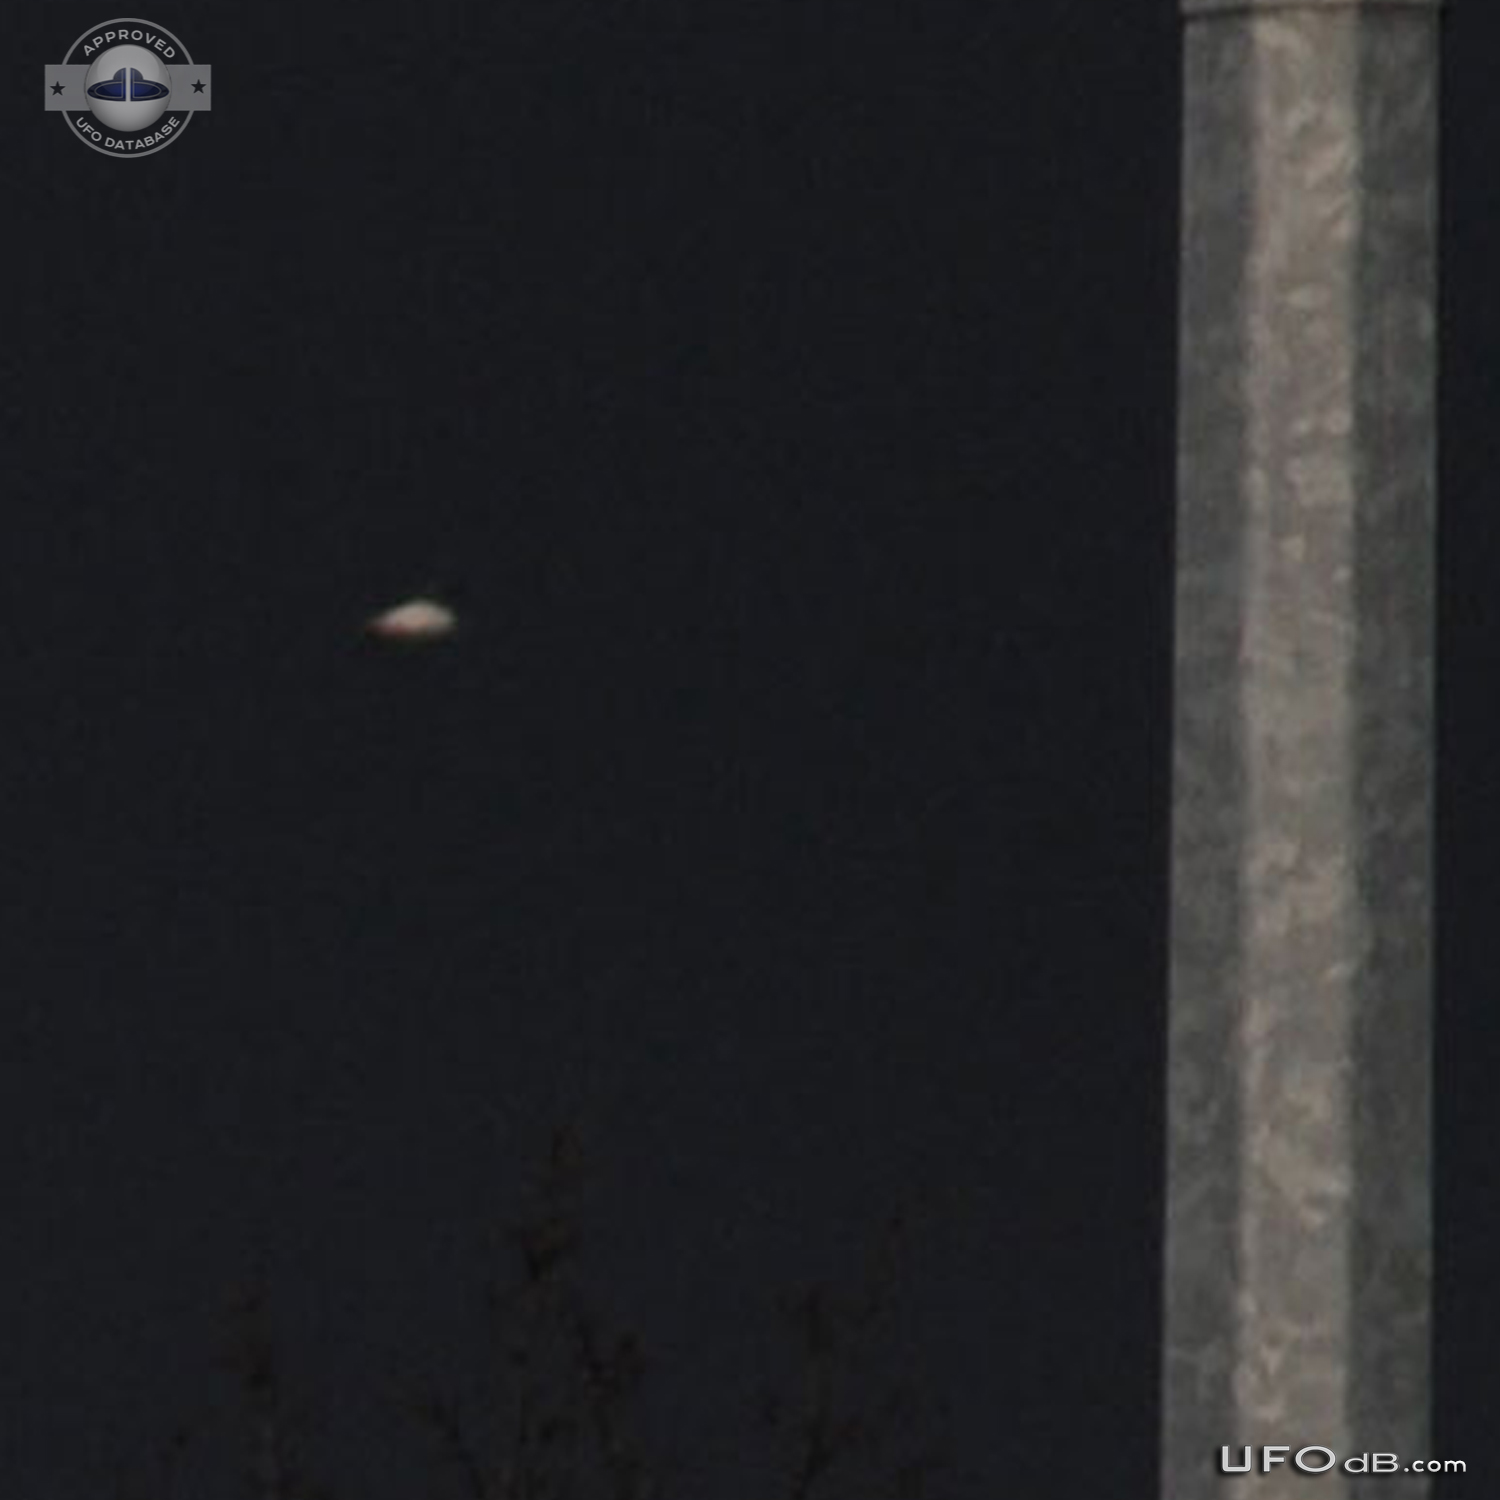 Saucer UFO appear on Soccer Game picture in Liverpool UK 2015 UFO Picture #626-4